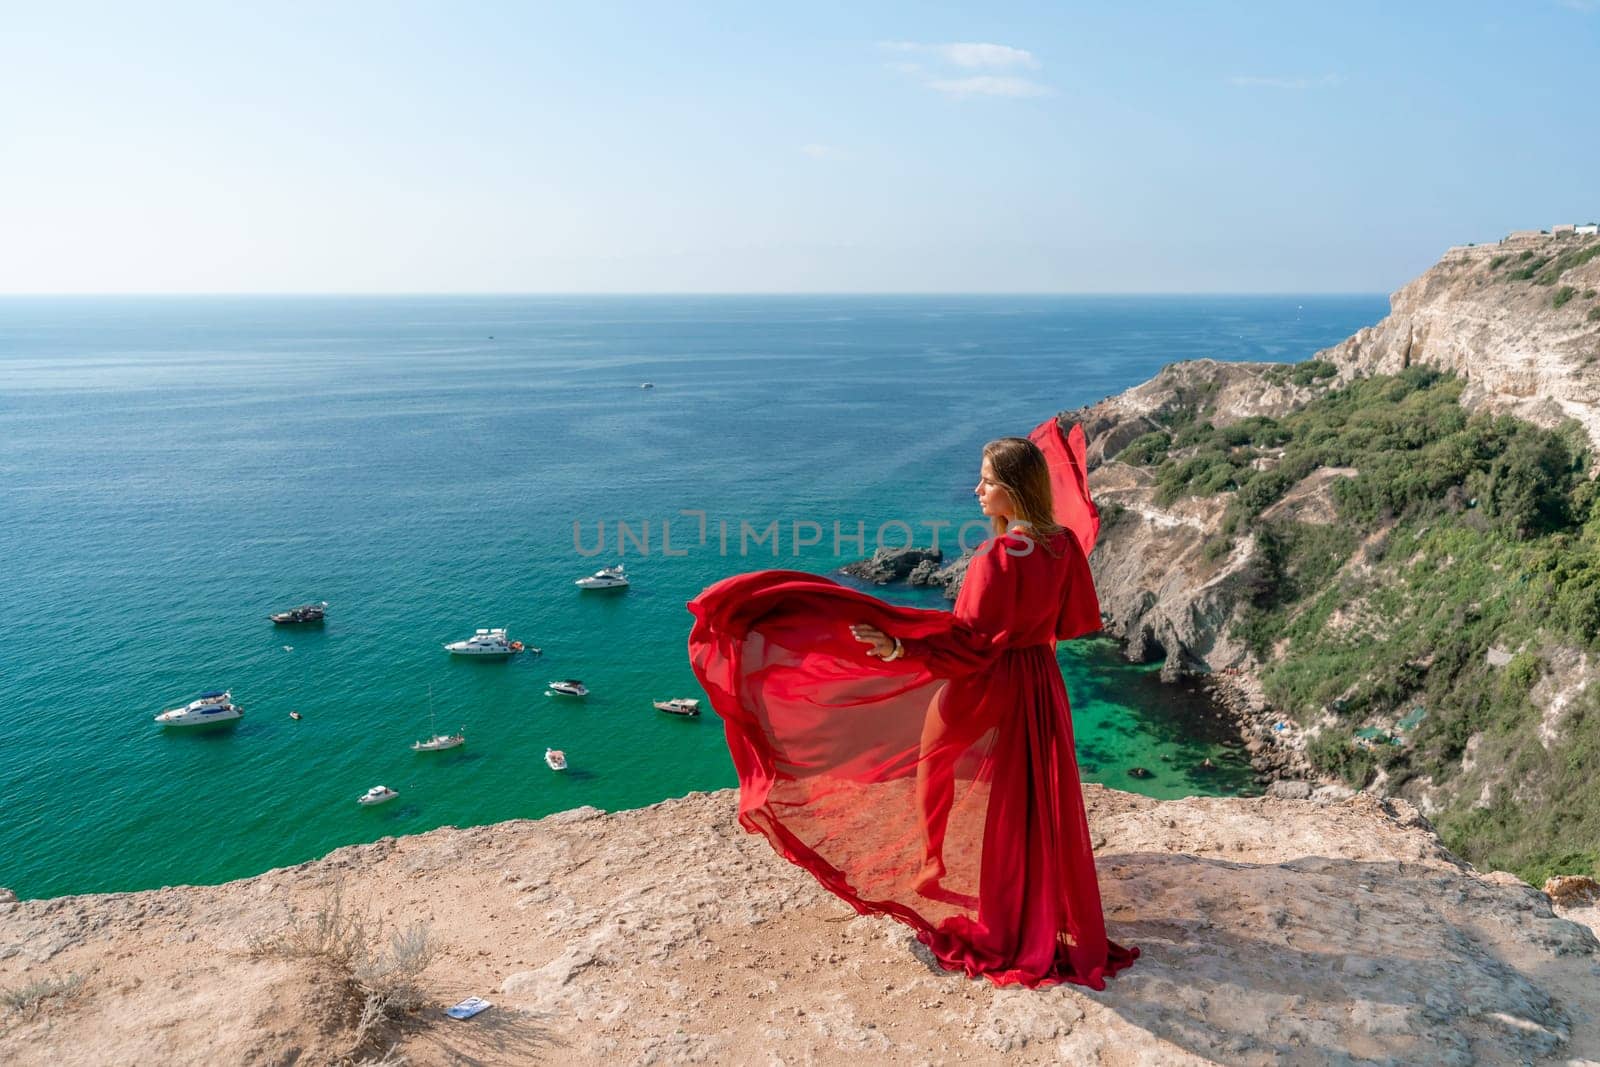 Red Dress Woman sea Cliff. A beautiful woman in a red dress and white swimsuit poses on a cliff overlooking the sea on a sunny day. Boats and yachts dot the background